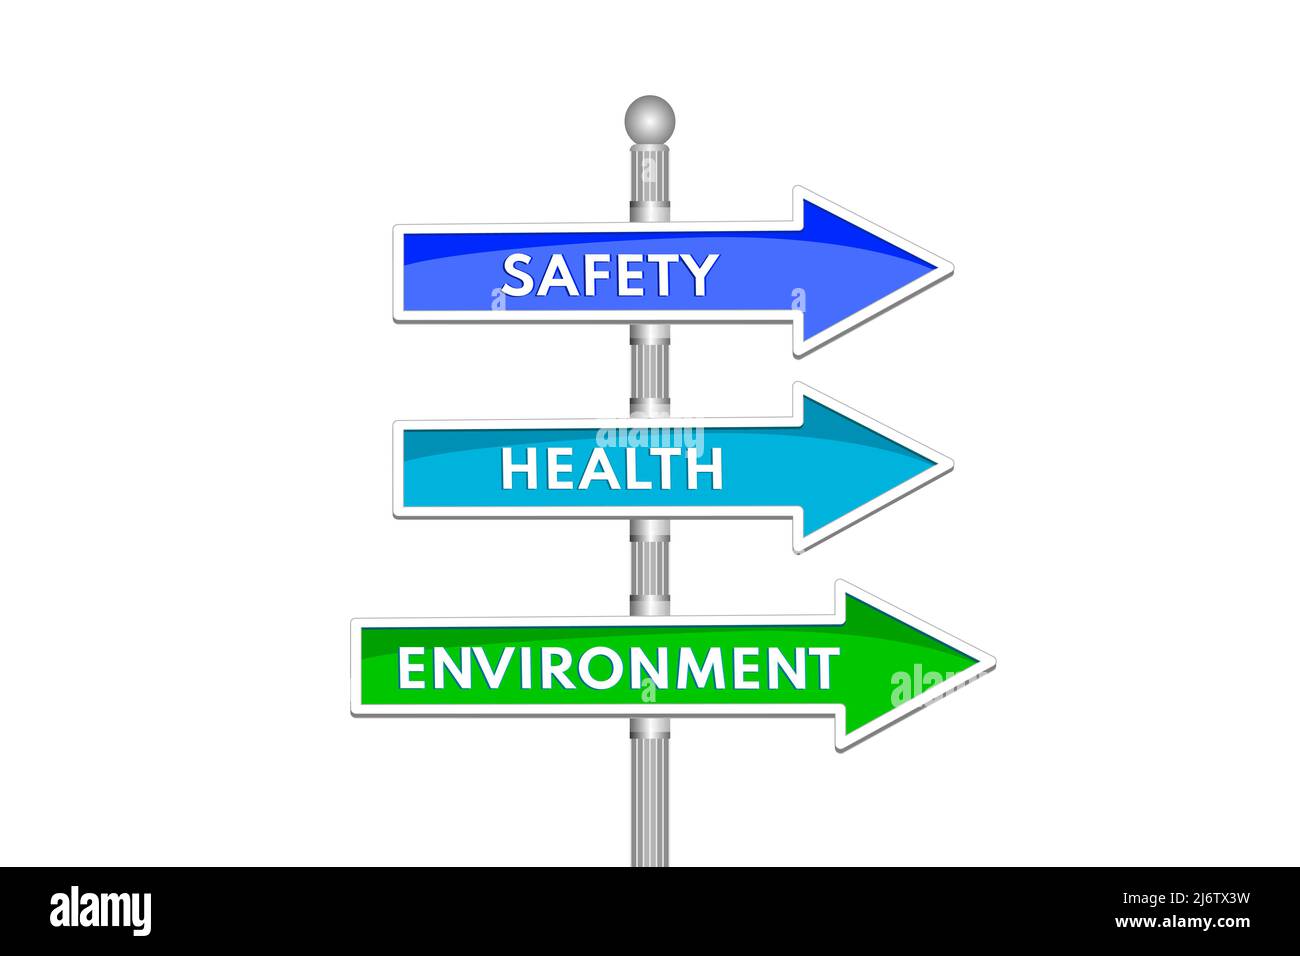 Healthy lifestyle concept. Safety, health and environment words on signpost isolated on white background. Vector illustration Stock Vector